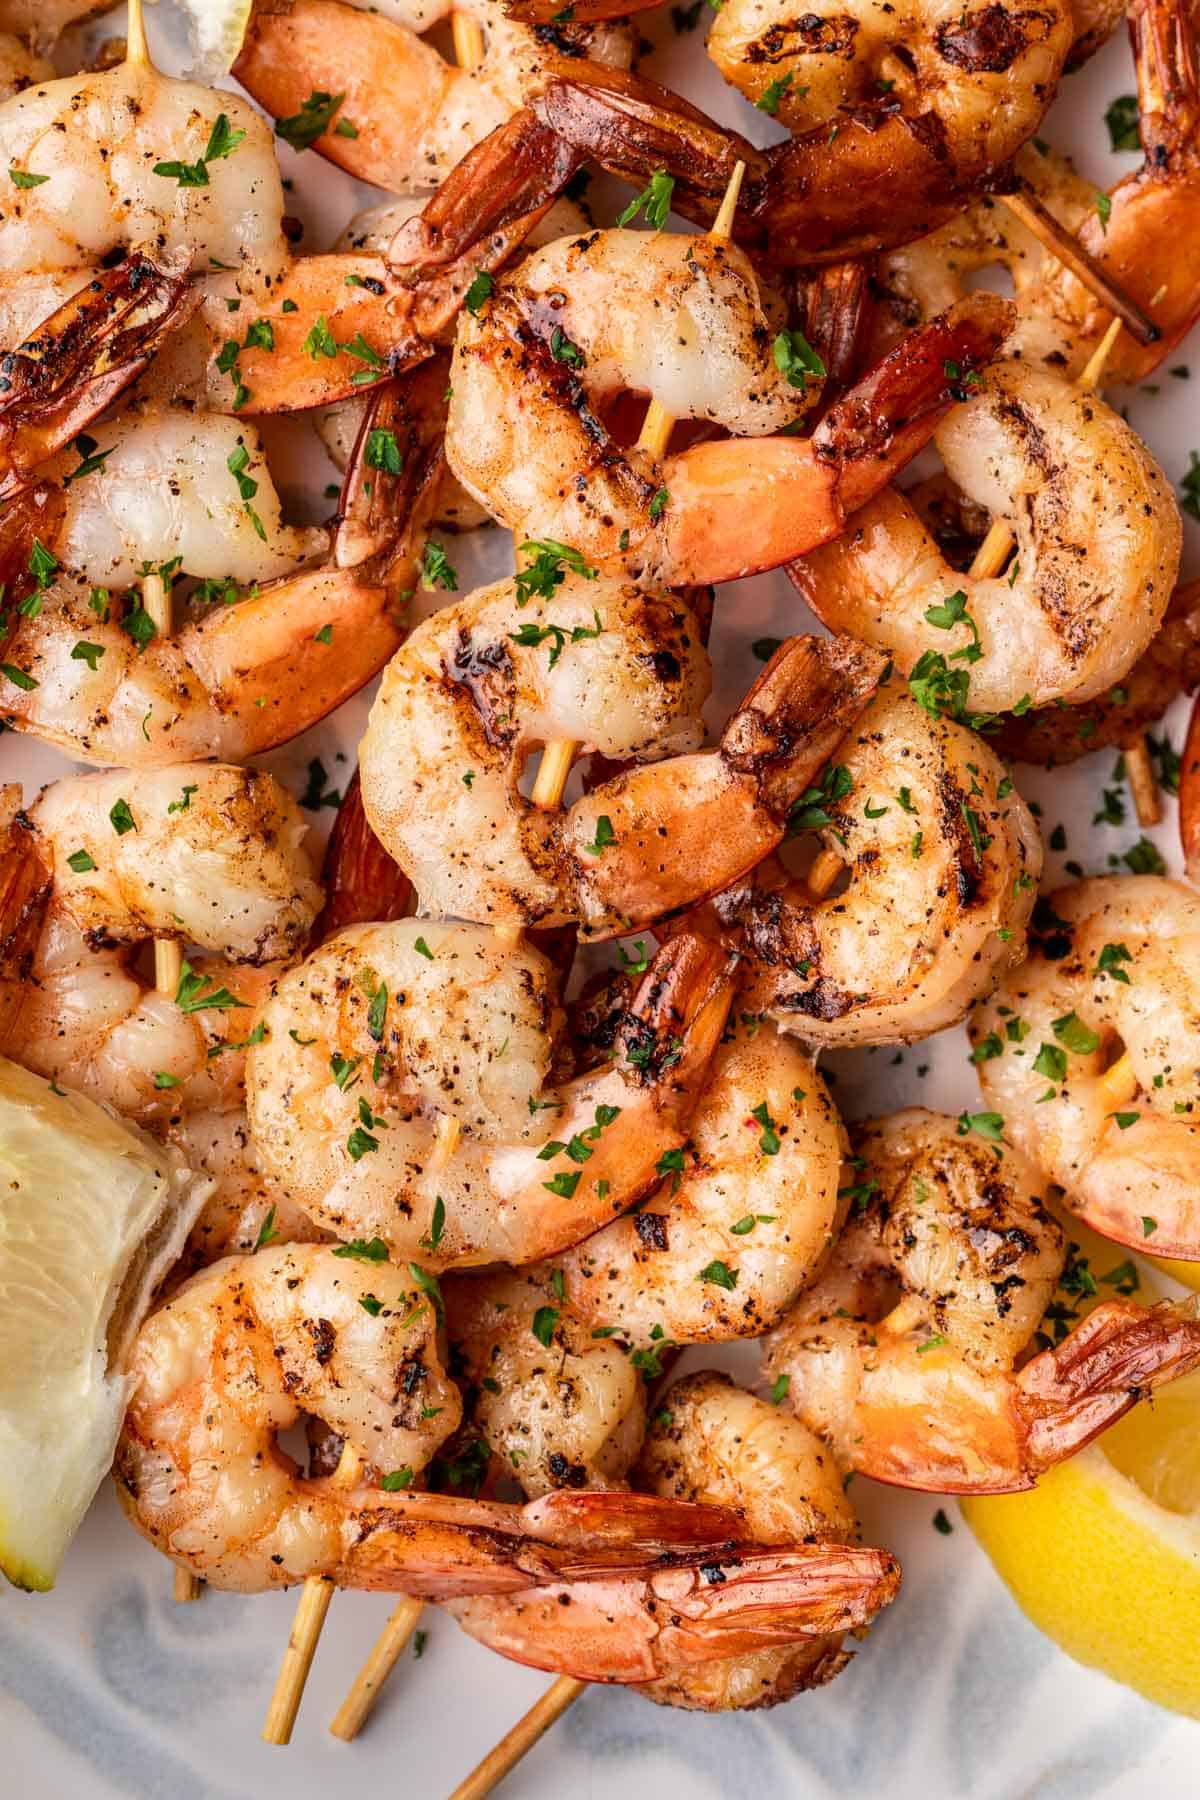 Smoked shrimp stacked on a platter.